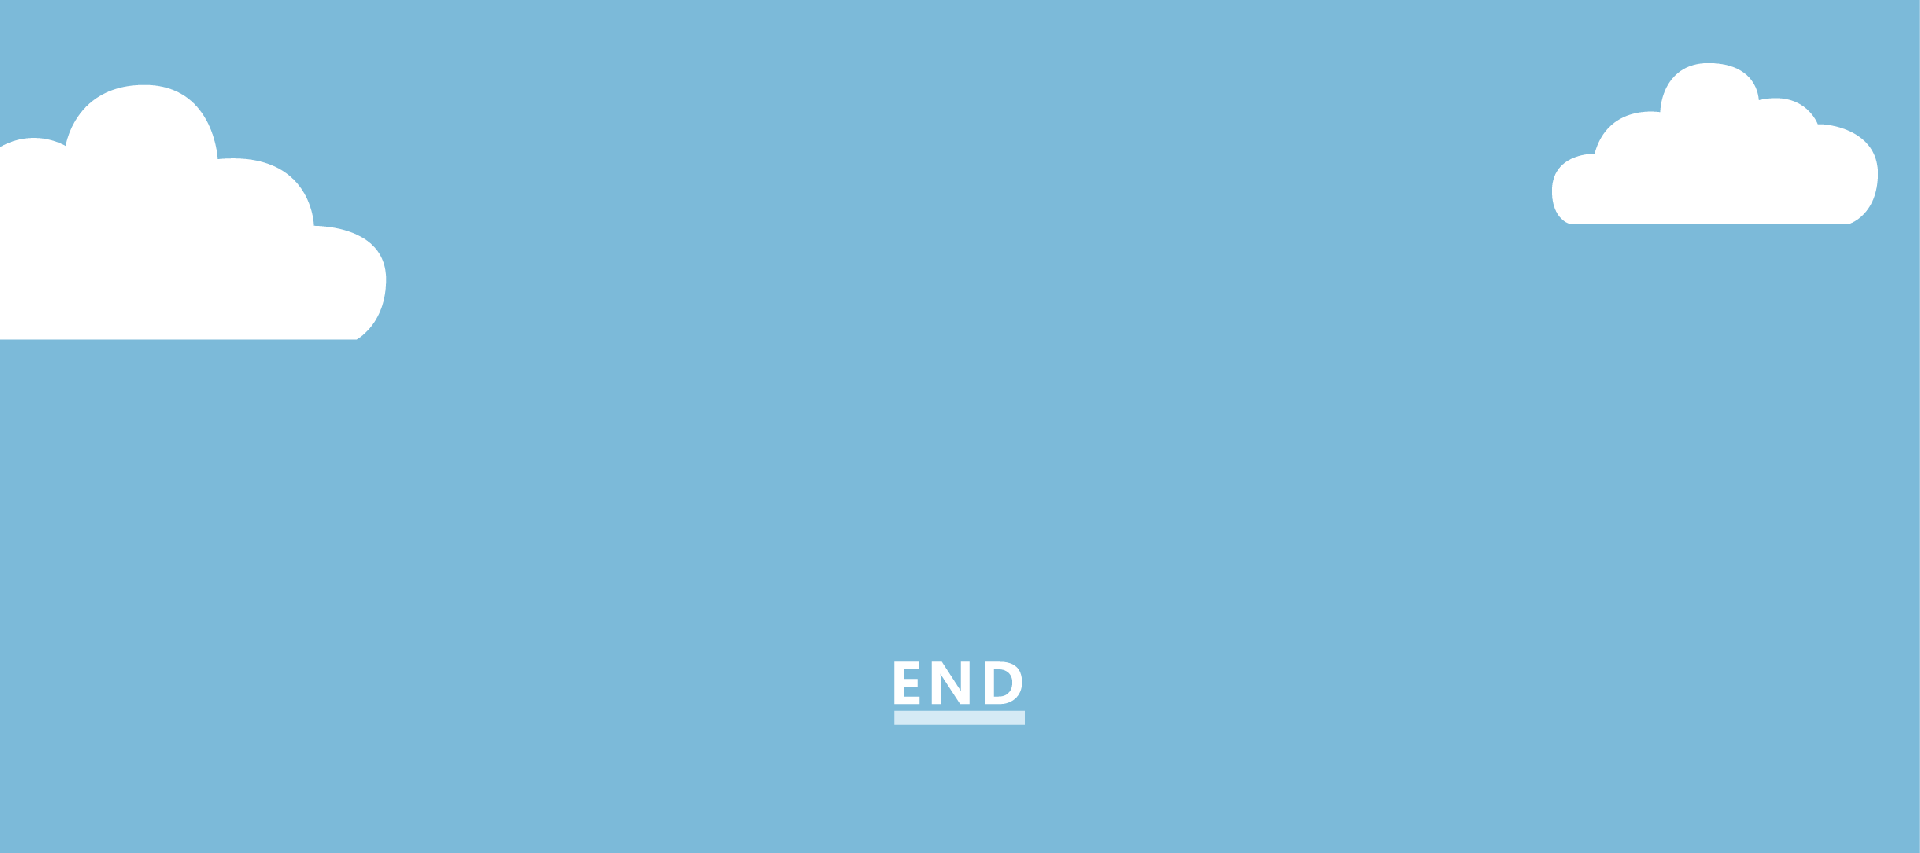 END.png